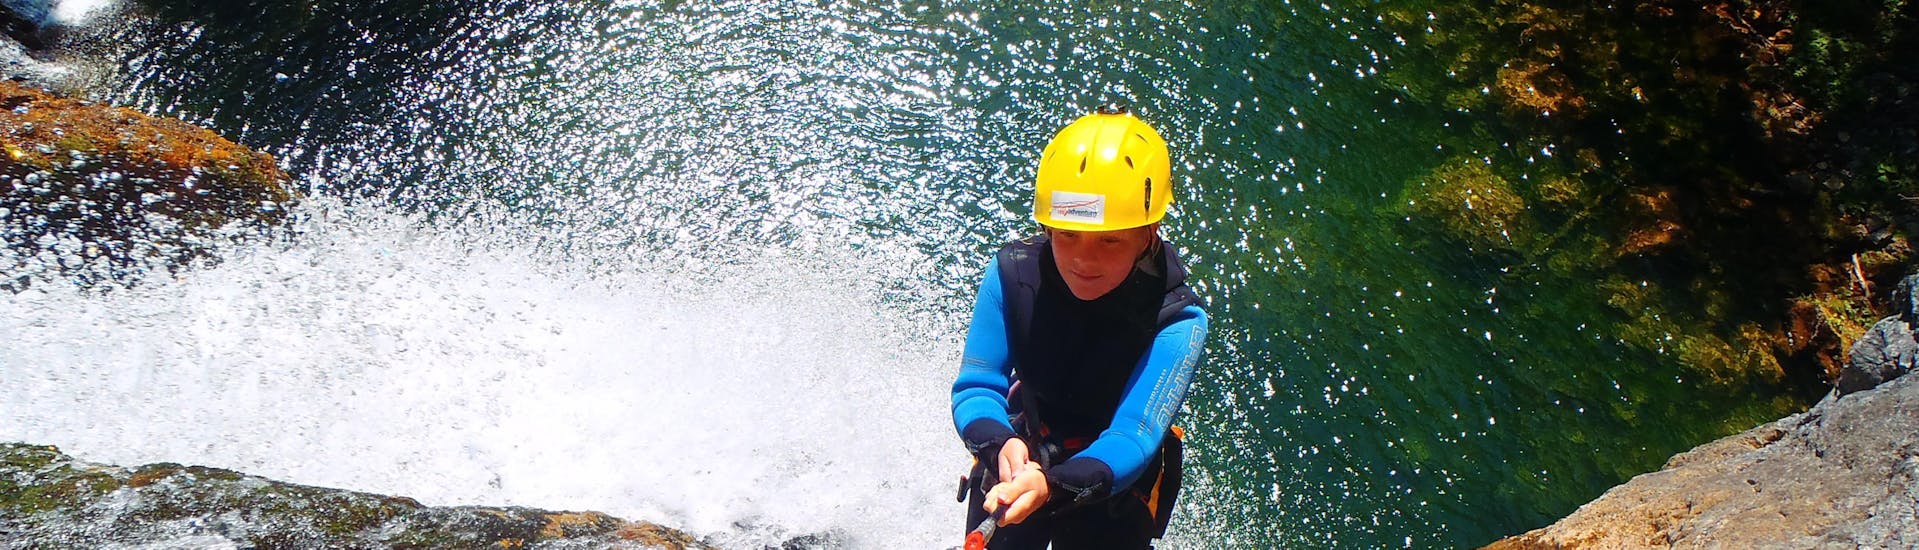 Canyoning sportif à Schladming.